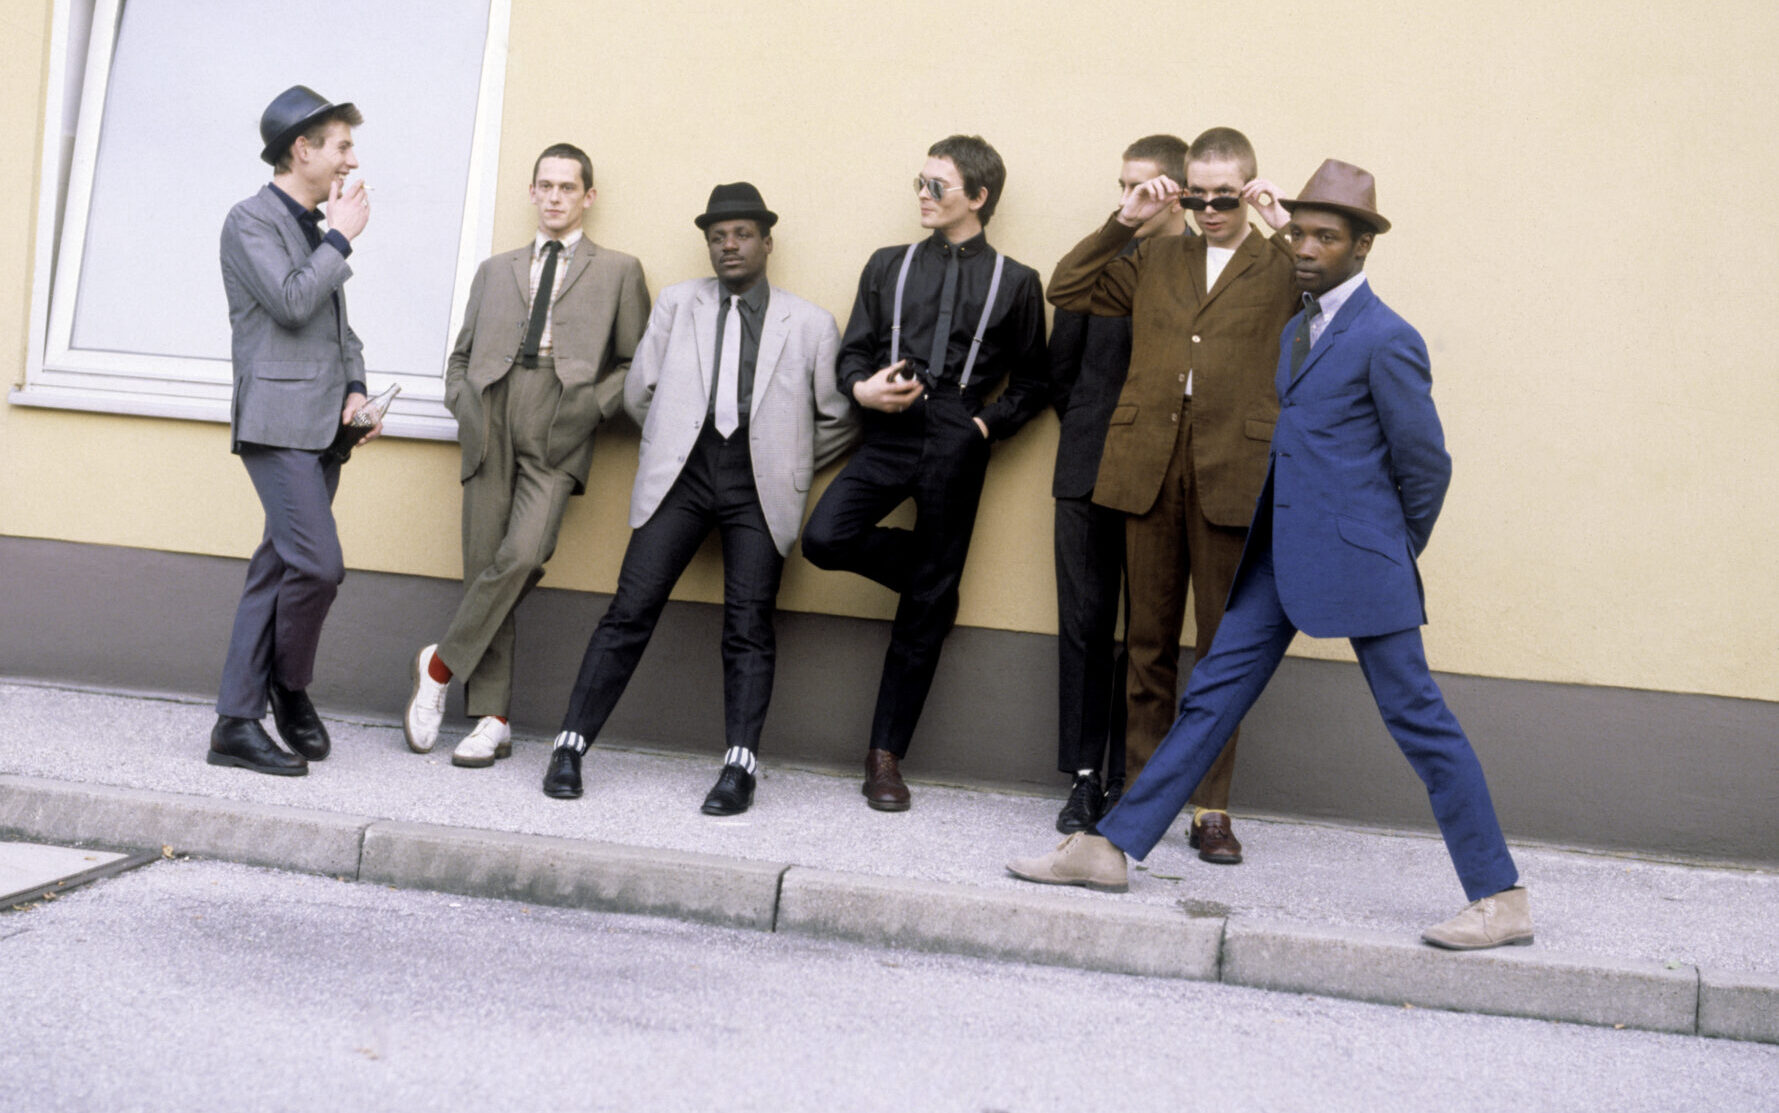 Ska-Musik-Gruppe THE SPECIALS (1979). (Photo by kpa/United Archives via Getty Images)